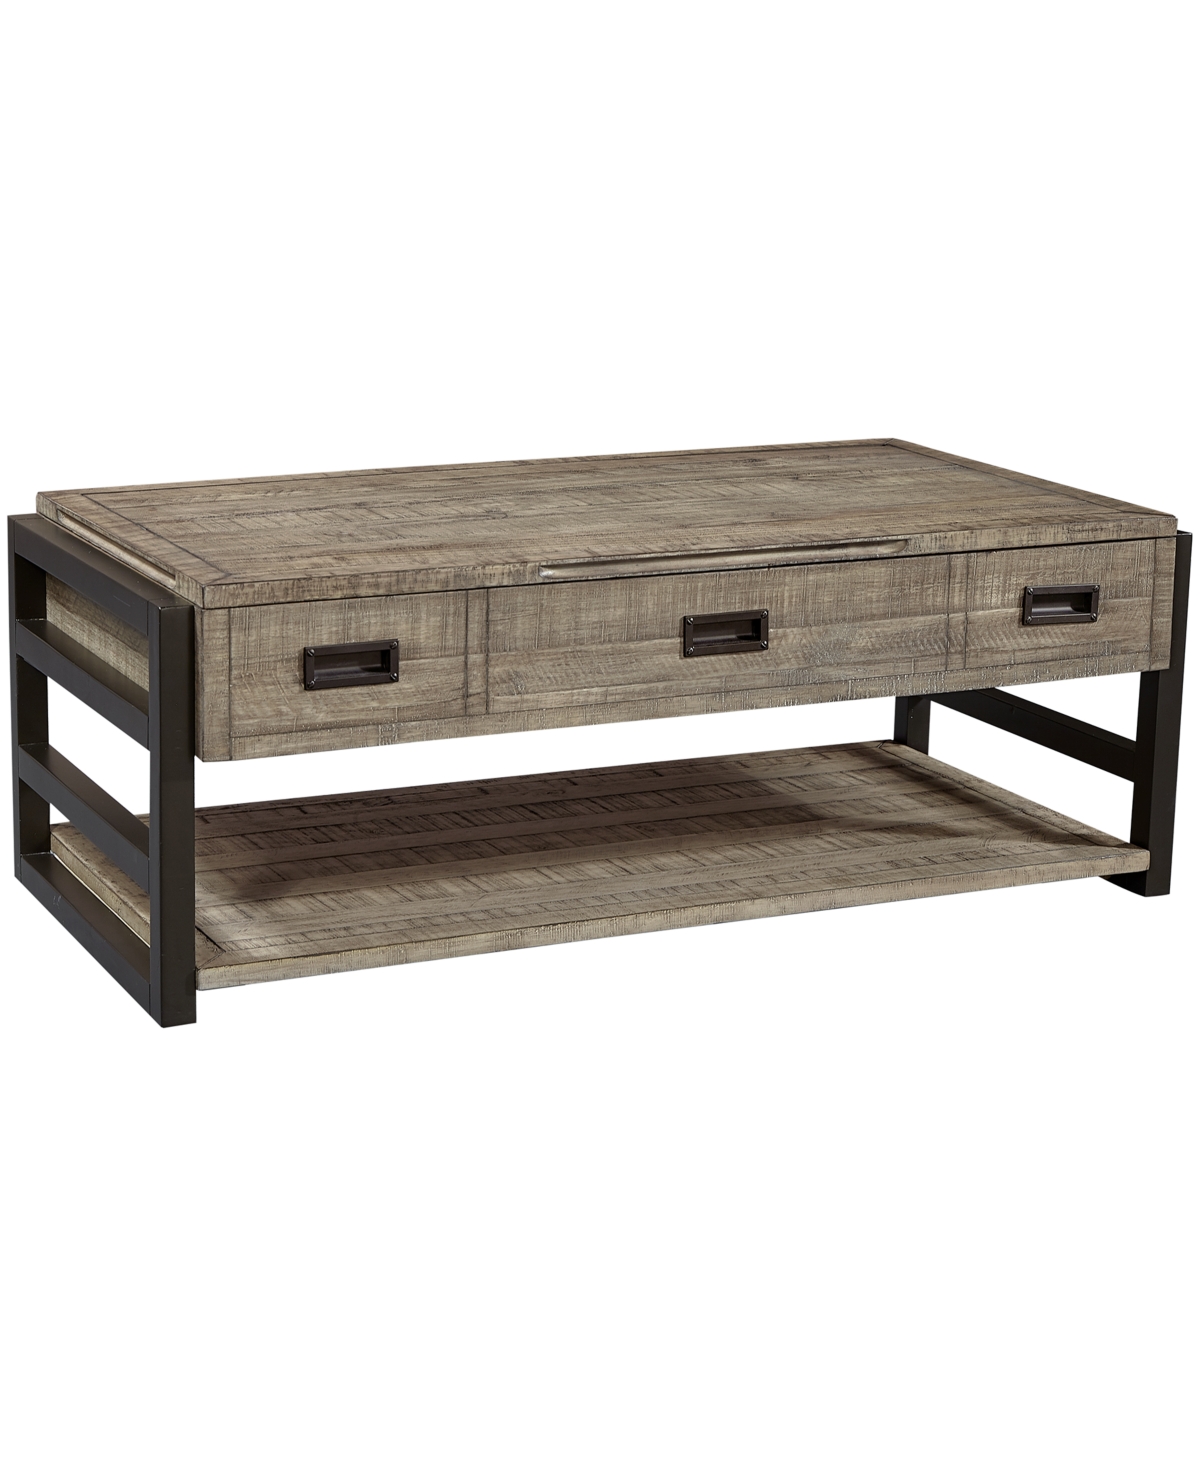 Furniture Grayson Lift Top Cocktail Table In Cinder Gray